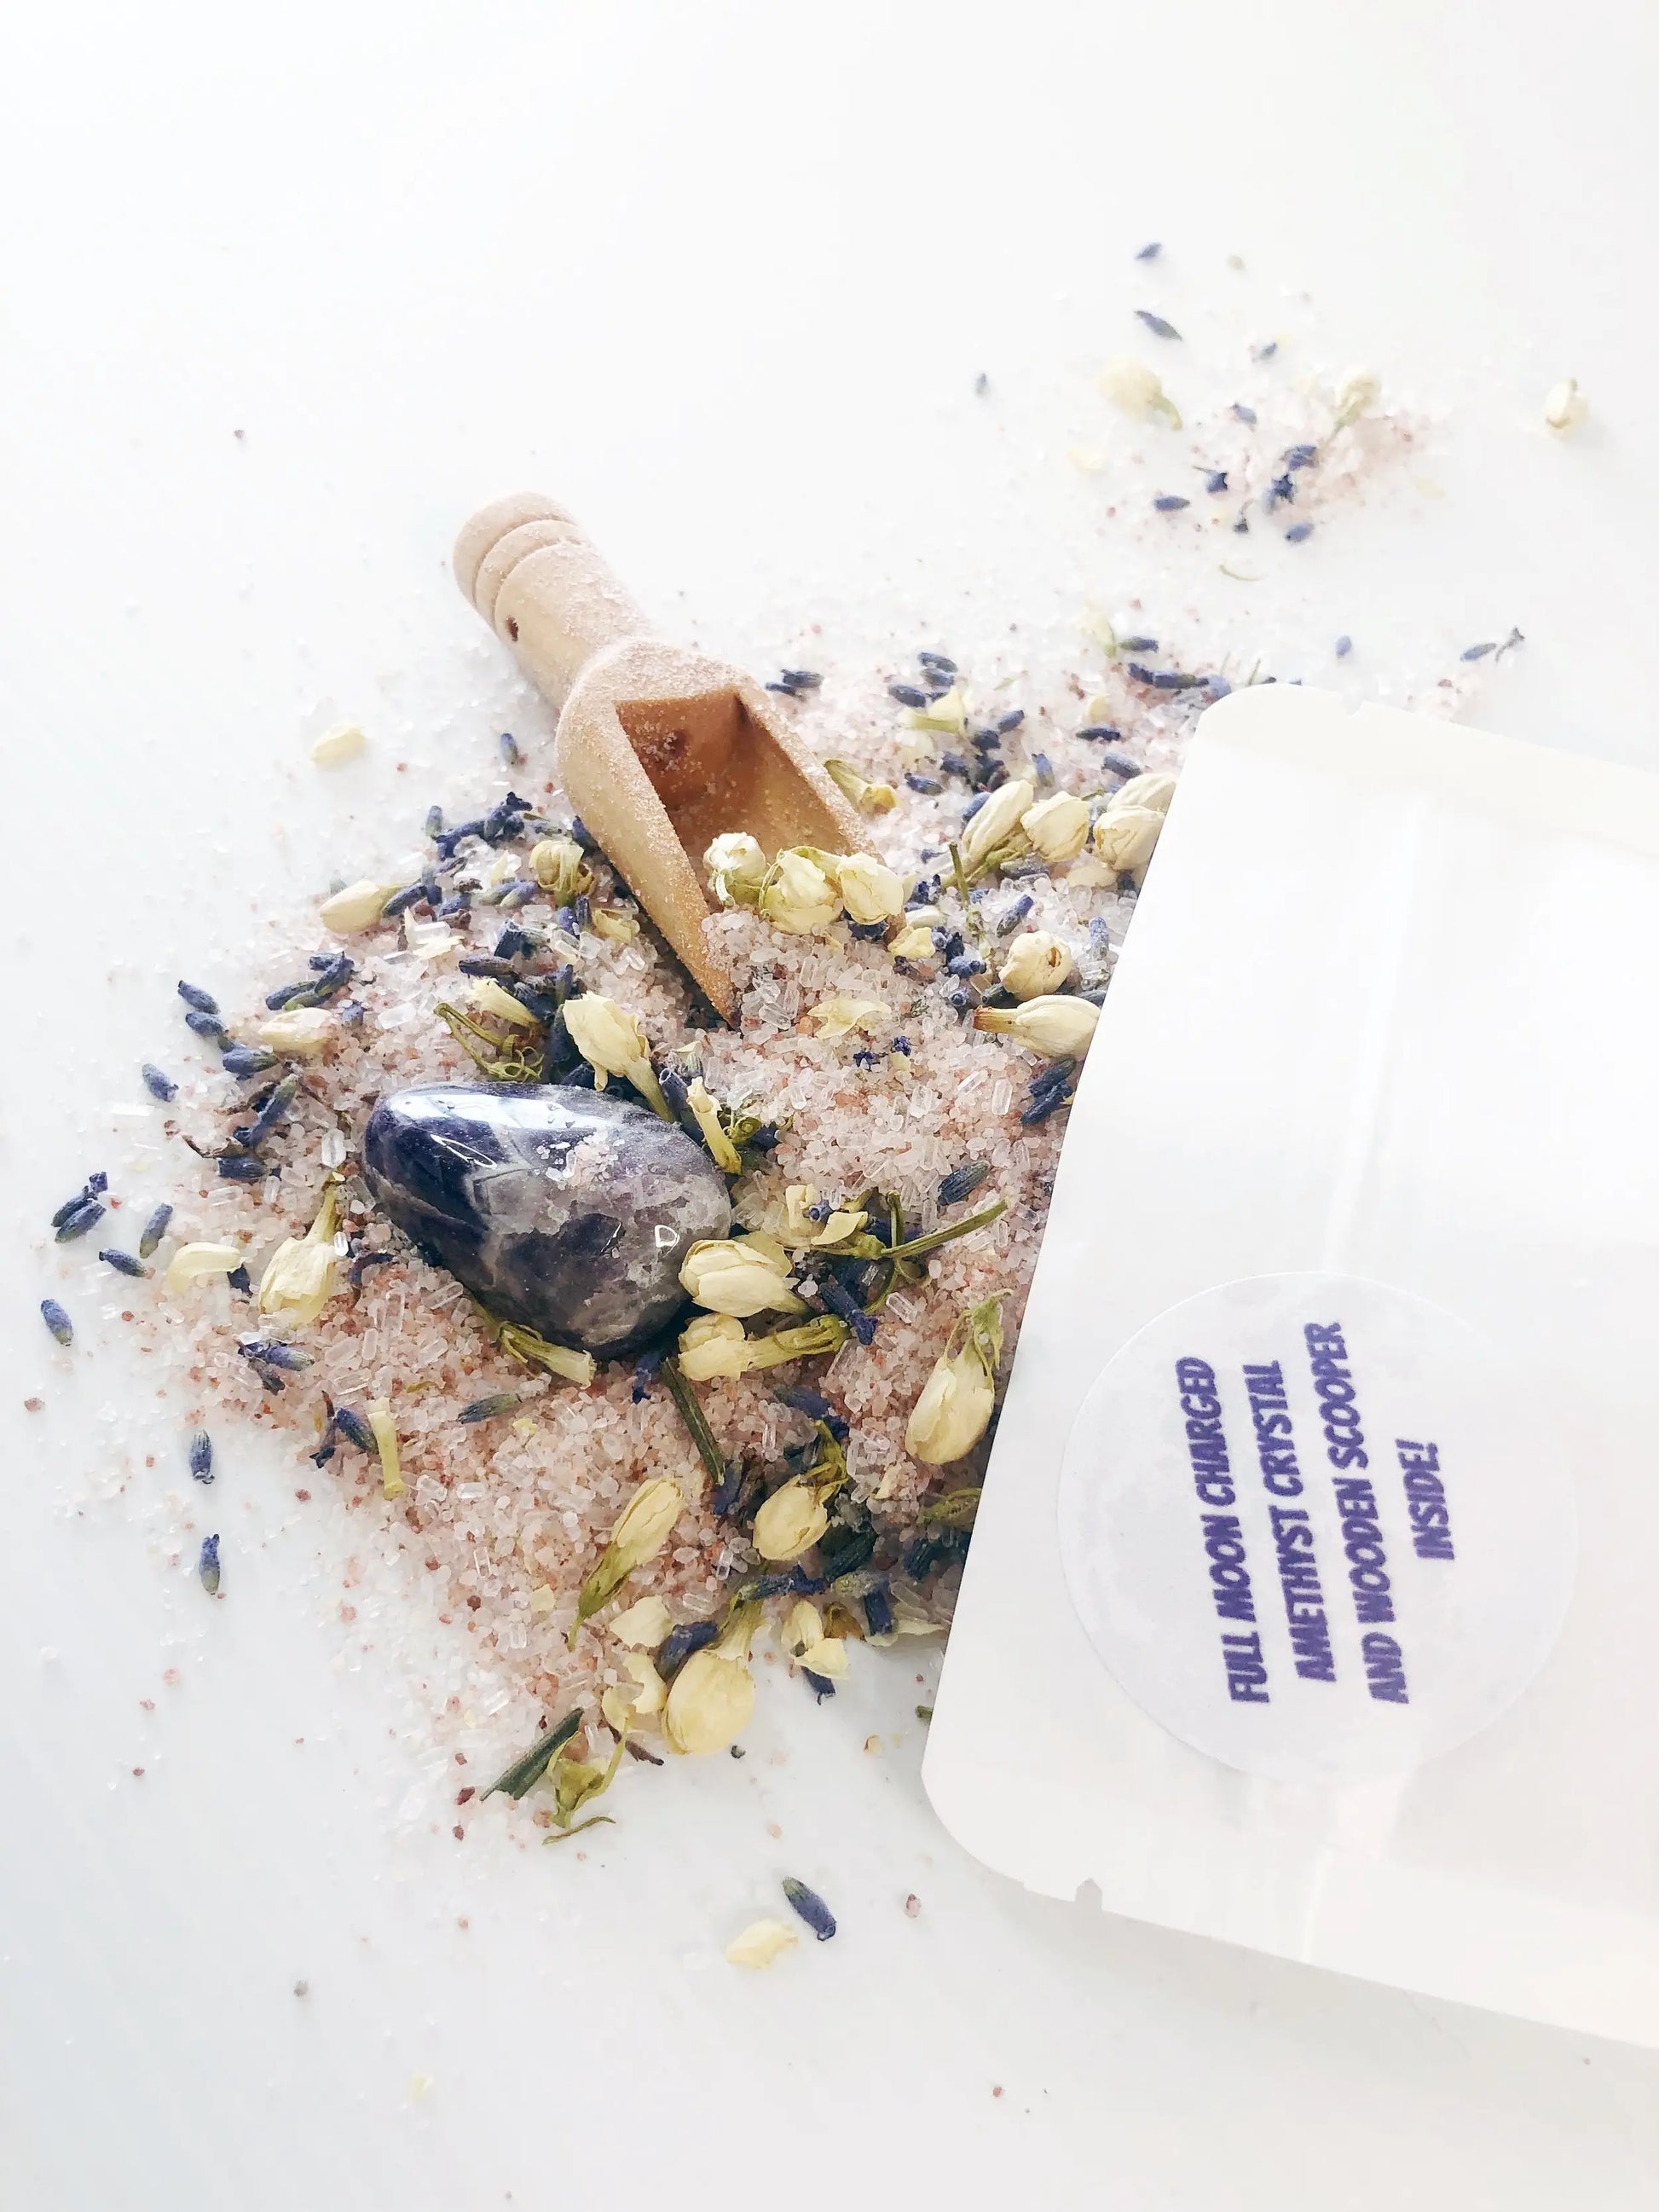 Fuck Off, Anxiety! Crystal Infused Bath Salts - Spellbound